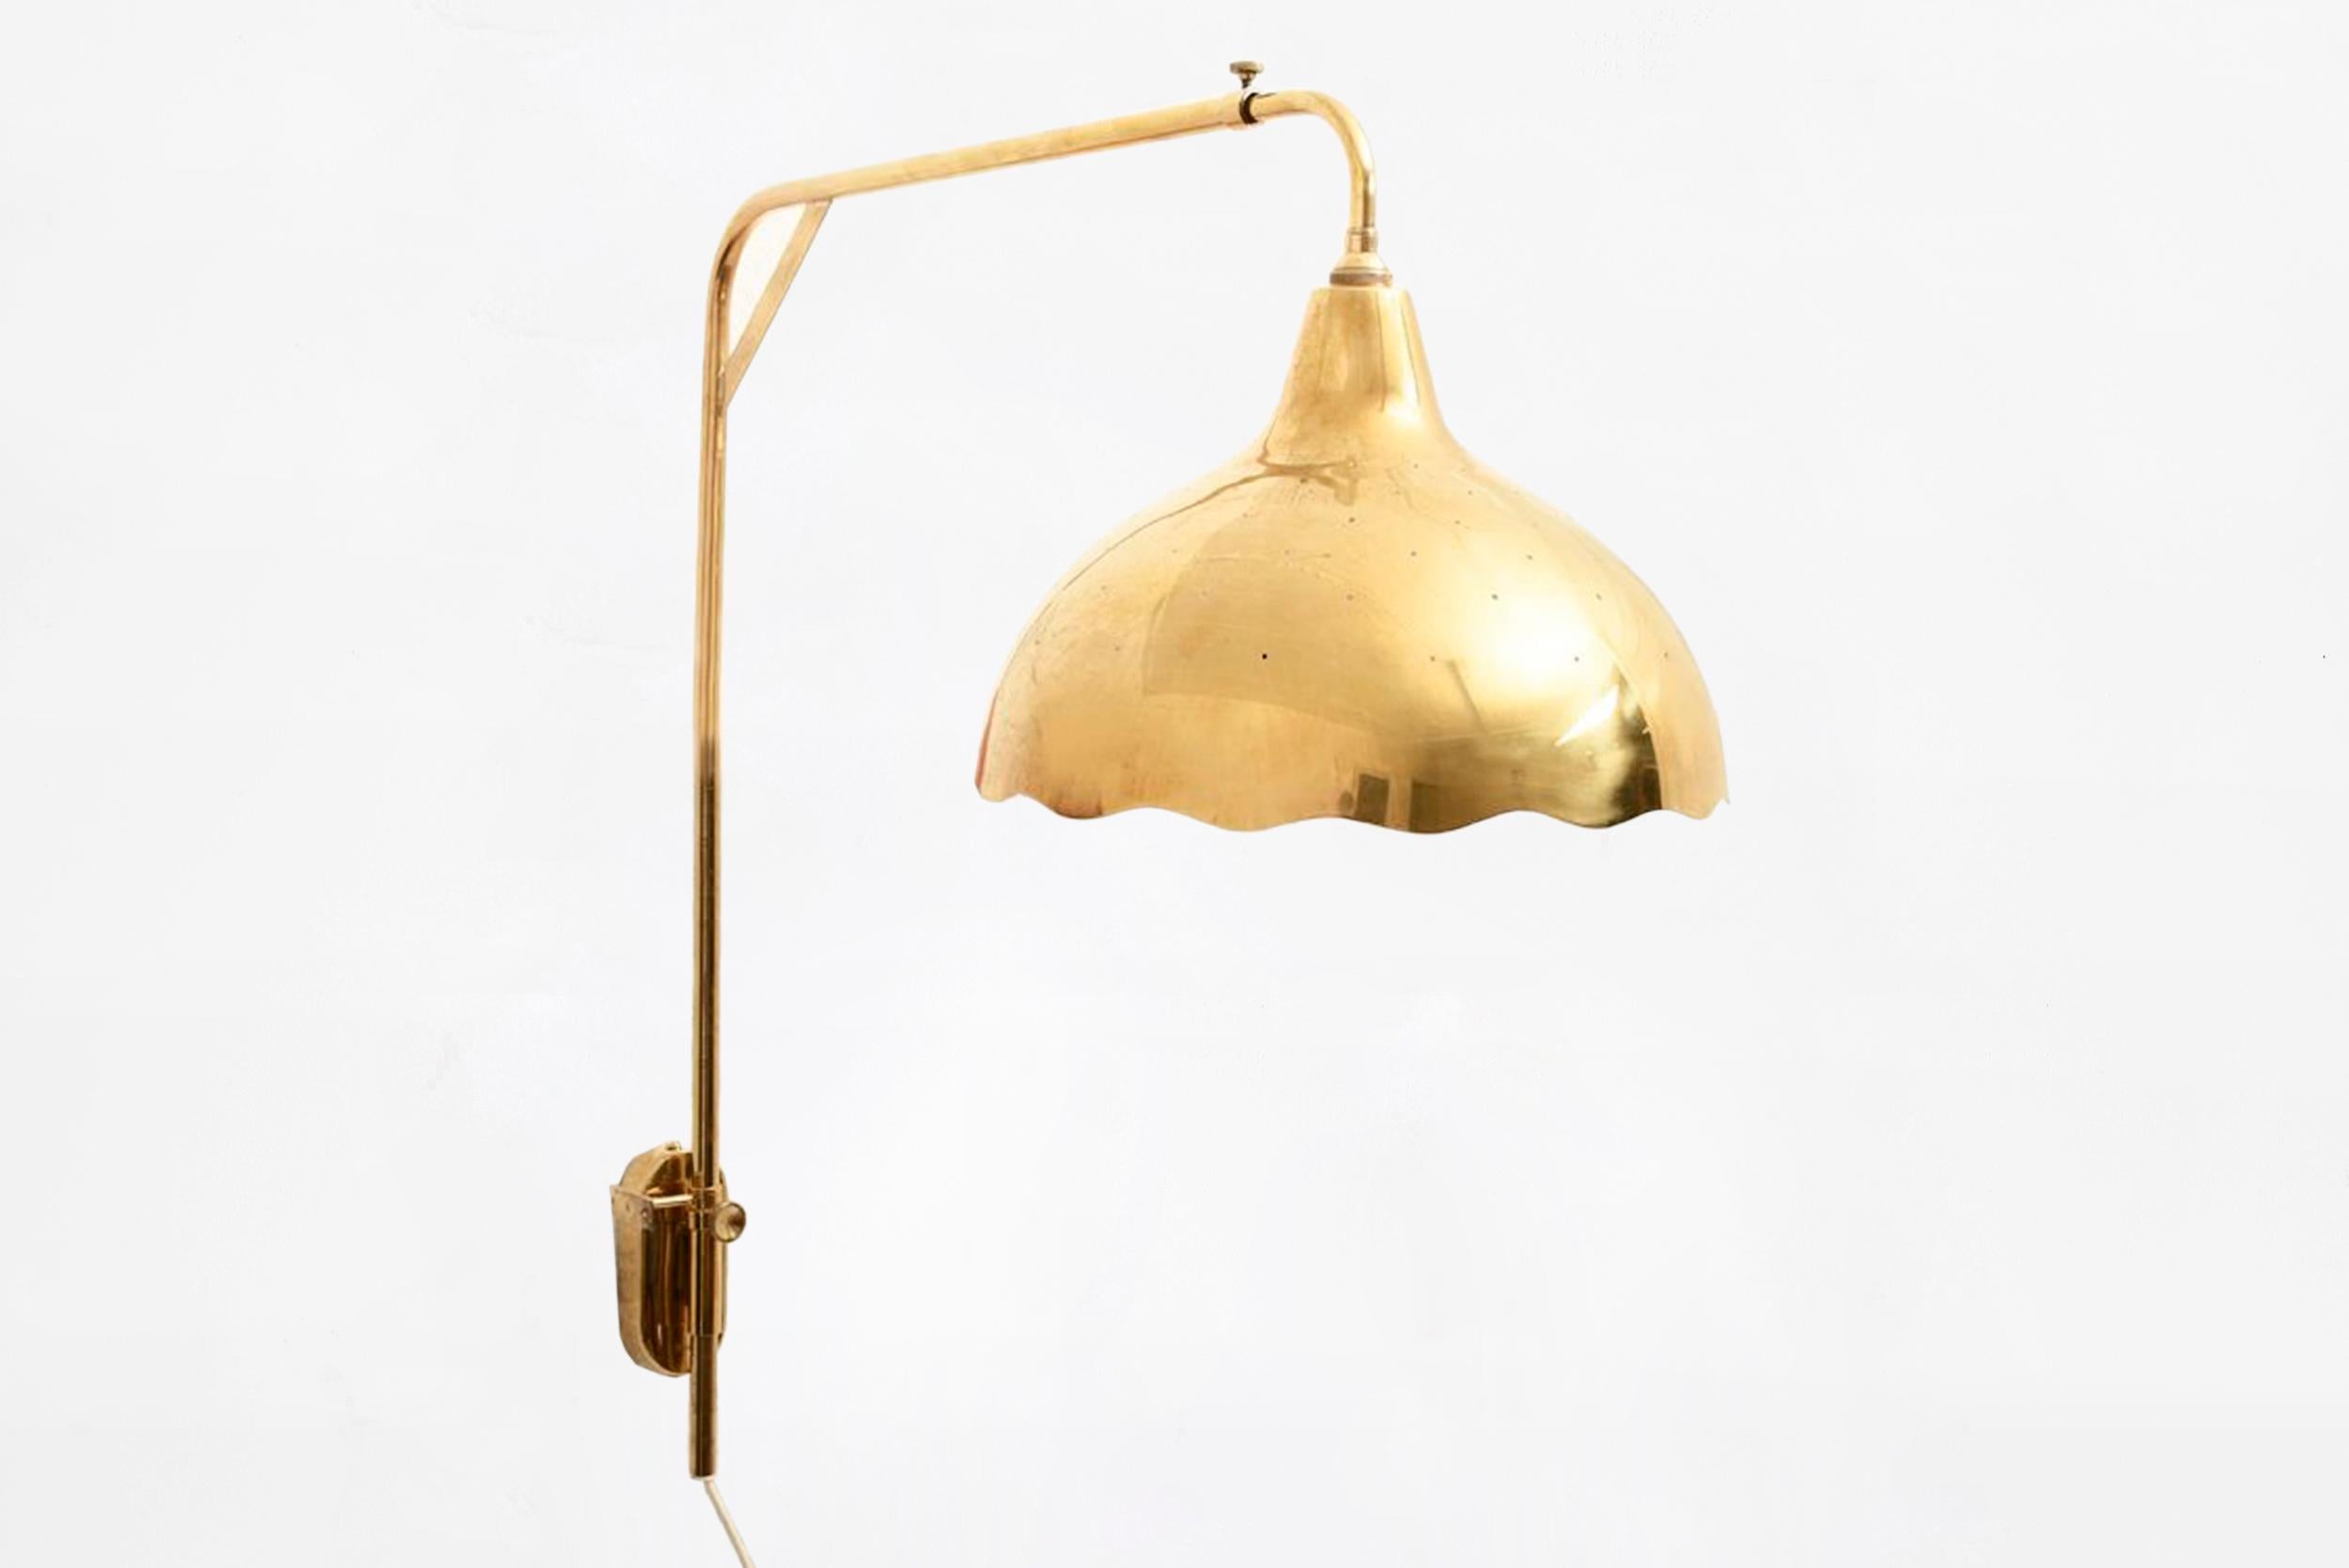 Paavo Tynell 
Pair of wall lamps
Manufactured by Taito Oy
Finland, 1940
Brass, frosted glass diffuser
From the archives of Side Gallery, Barcelona

Measurements
32 cm x 41 H cm
12.5 in x 16 H in

Bio
Paavo Tynell (1890-1973) was an